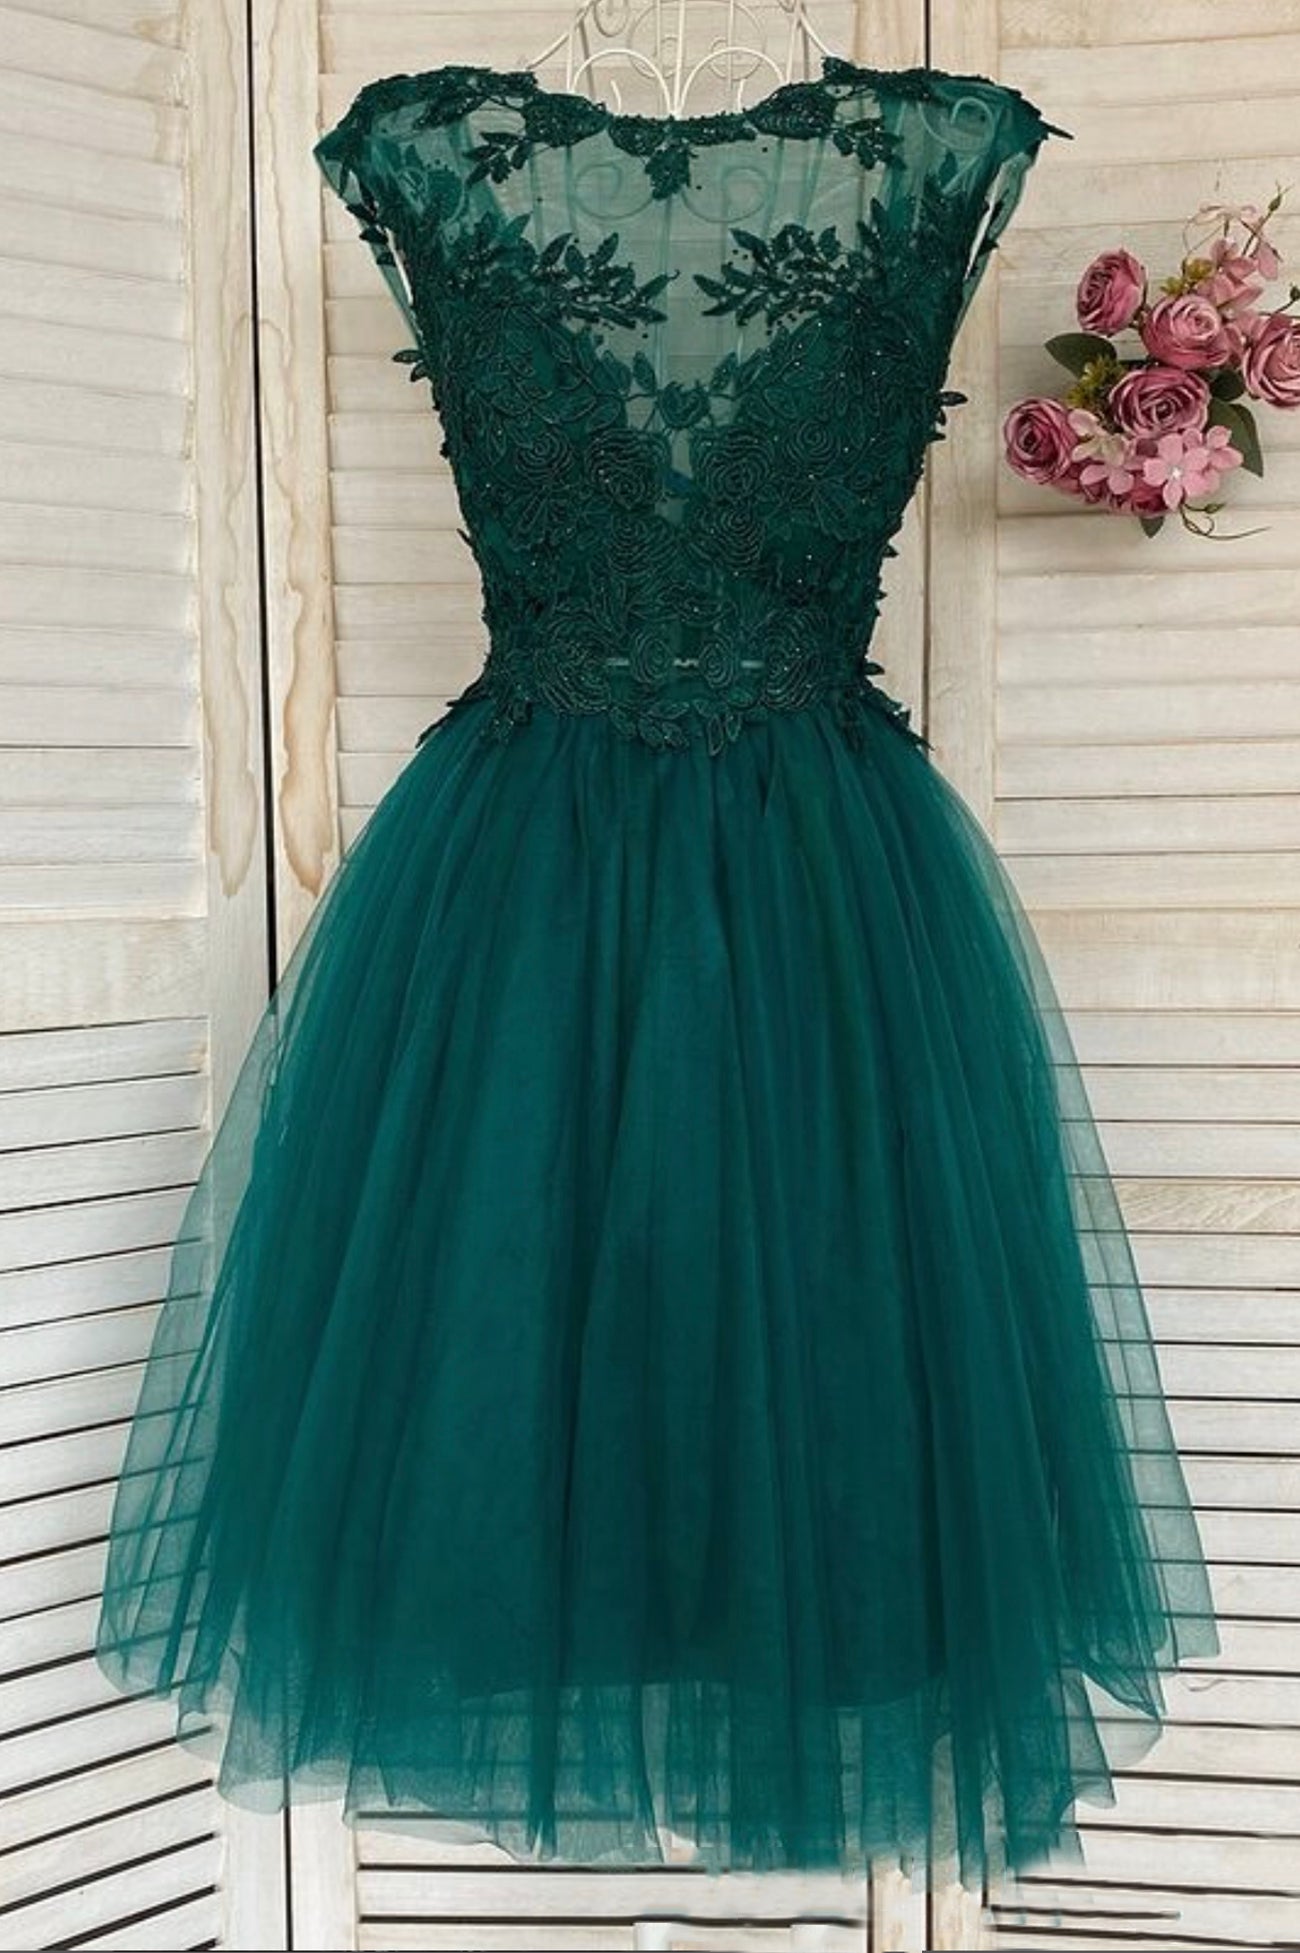 Green Lace Short Corset Prom Dress, A-Line Corset Homecoming Dress outfit, Prom Dresses Open Back